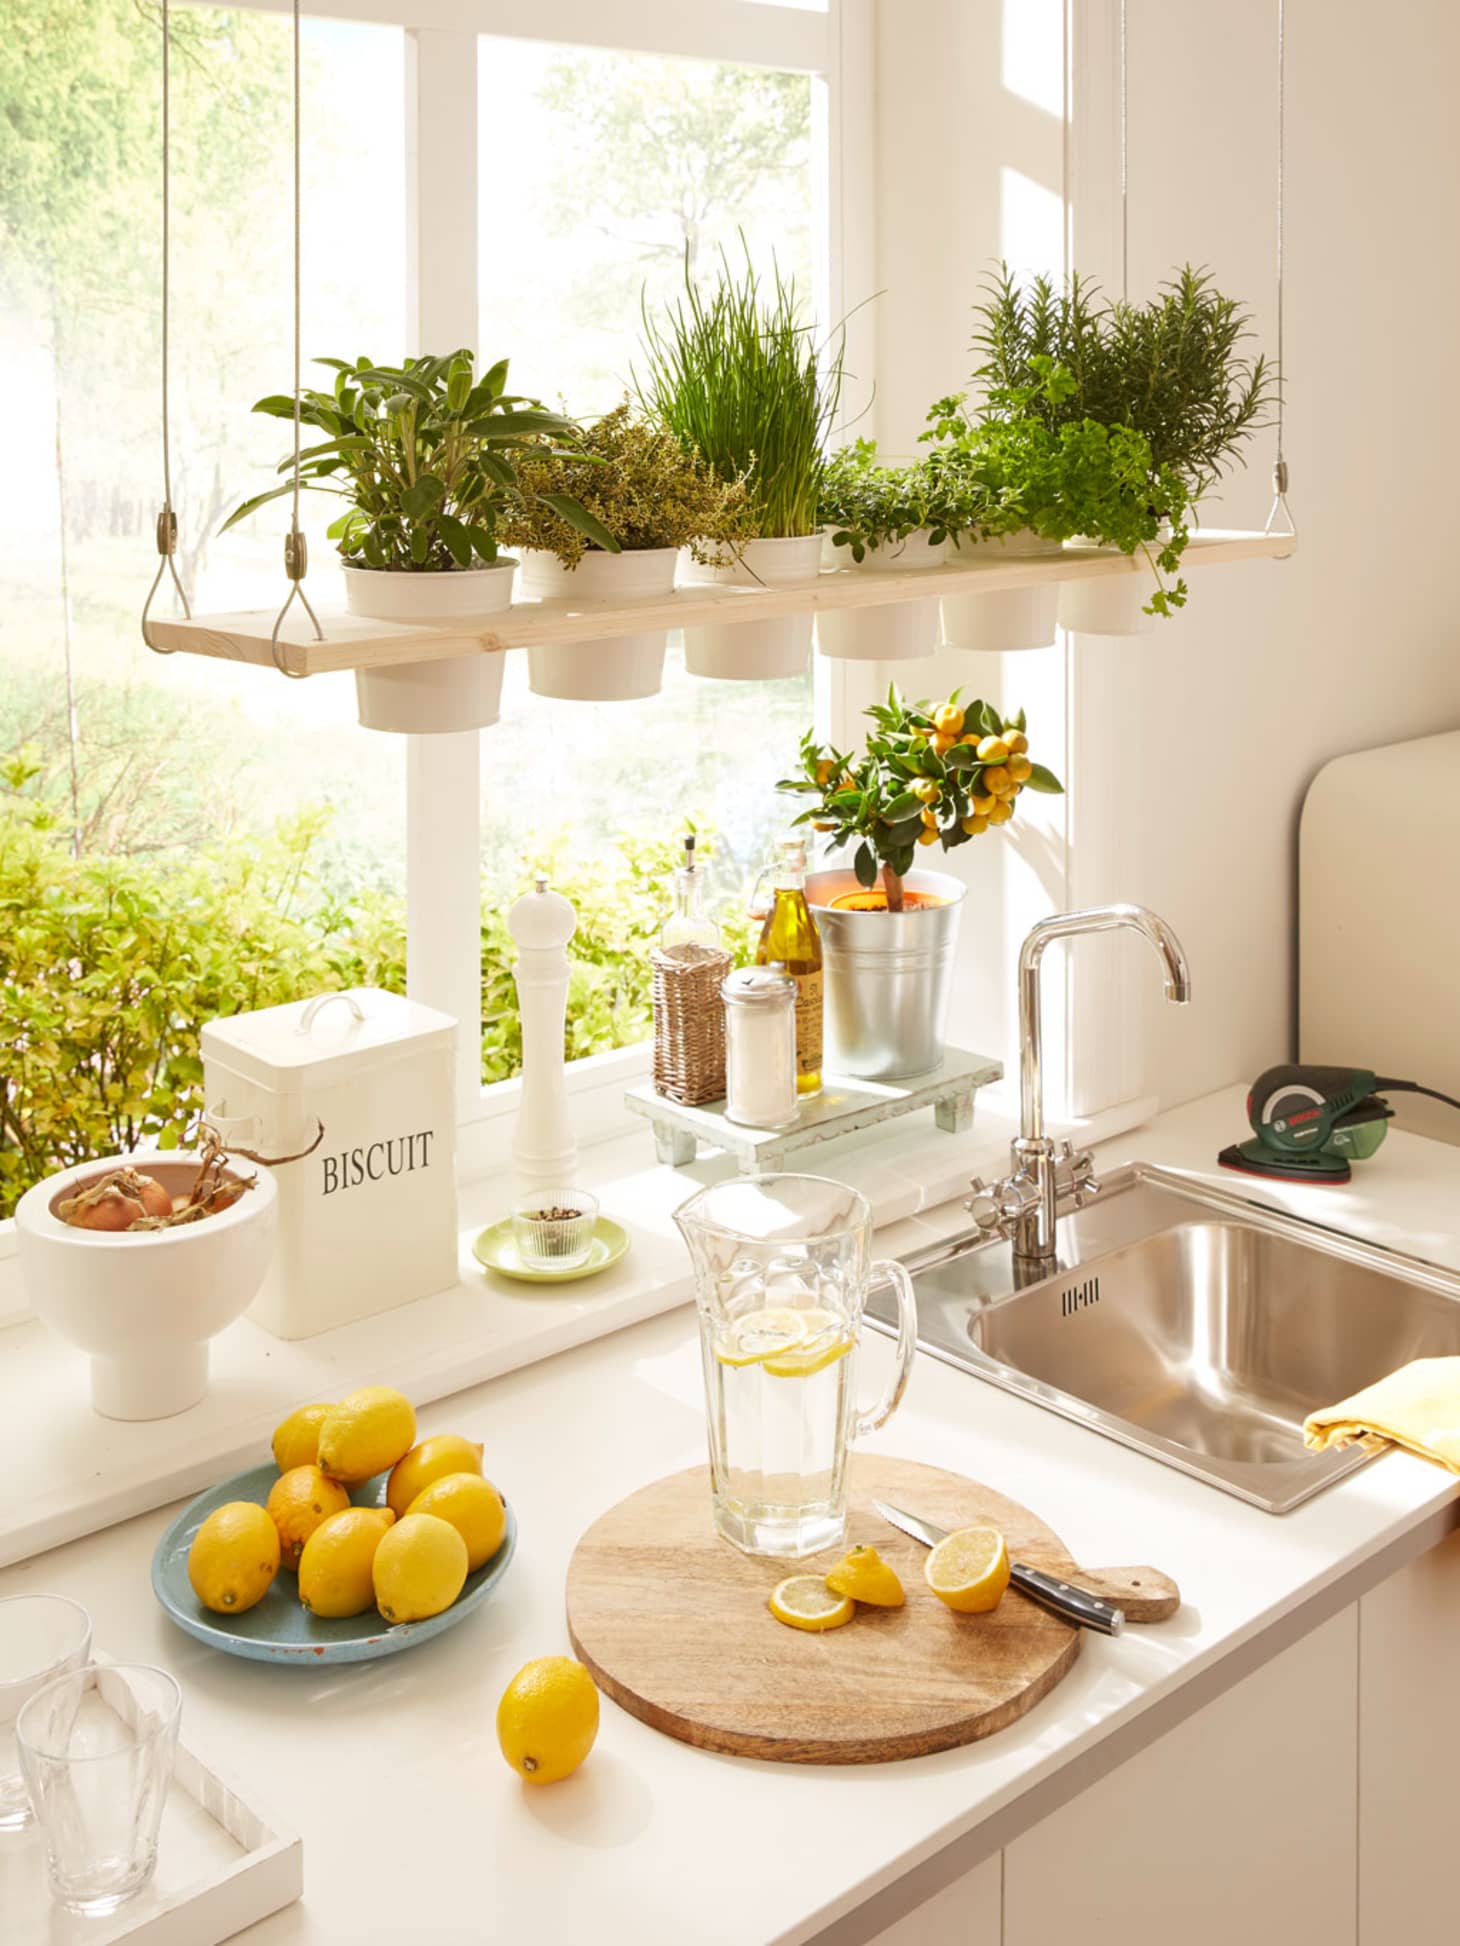 Creative Ways to Make Room for Plants  in the Kitchen  